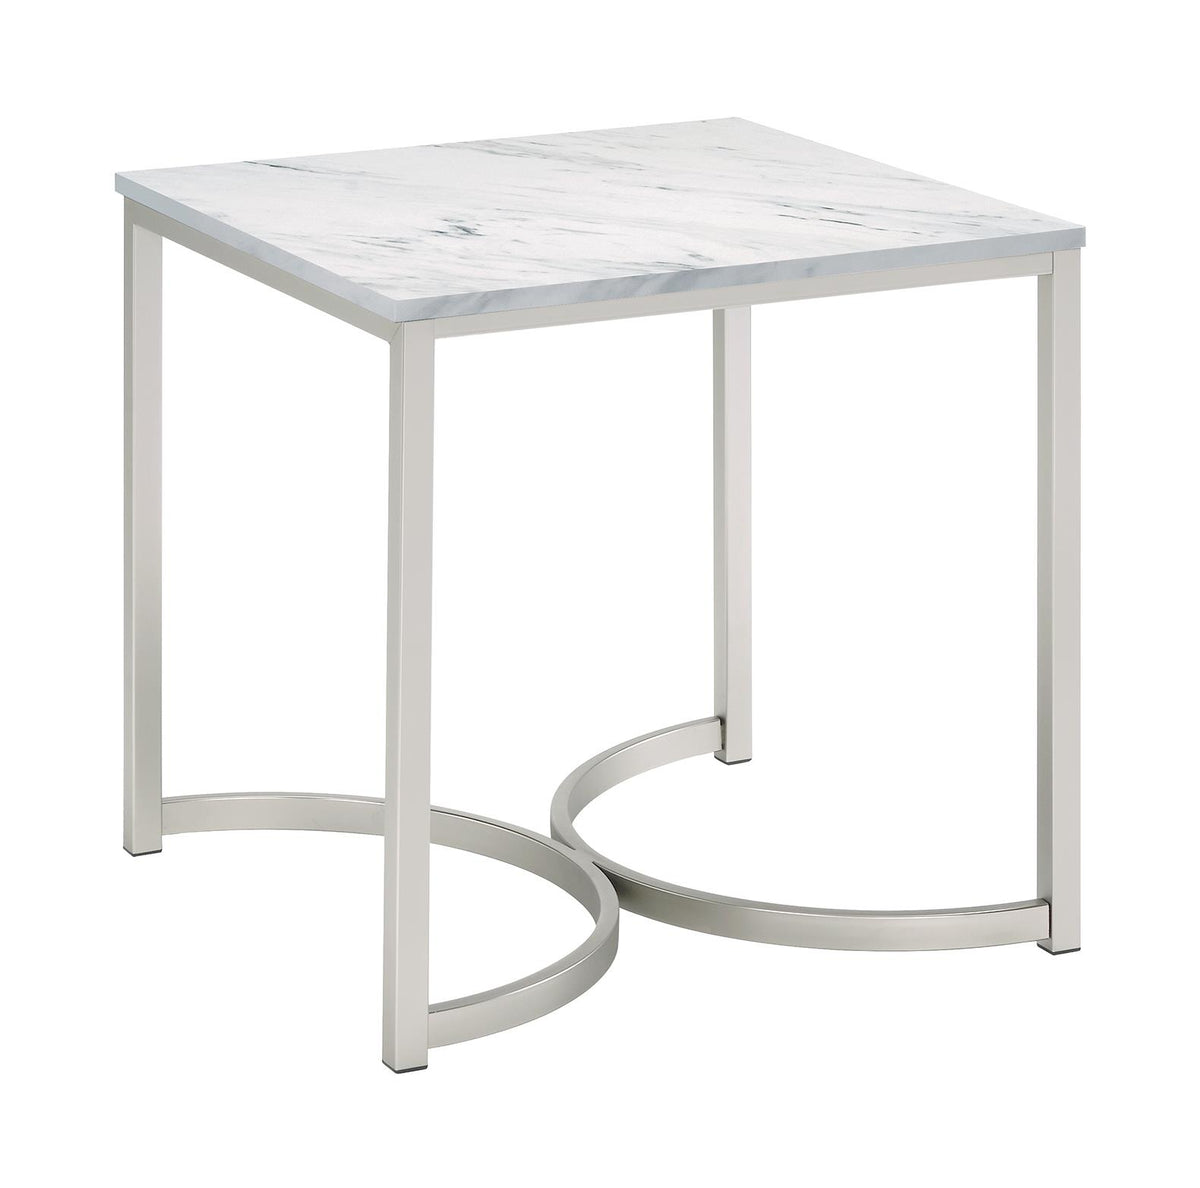 Leona Faux Marble Square End Table White and Satin Nickel  Las Vegas Furniture Stores